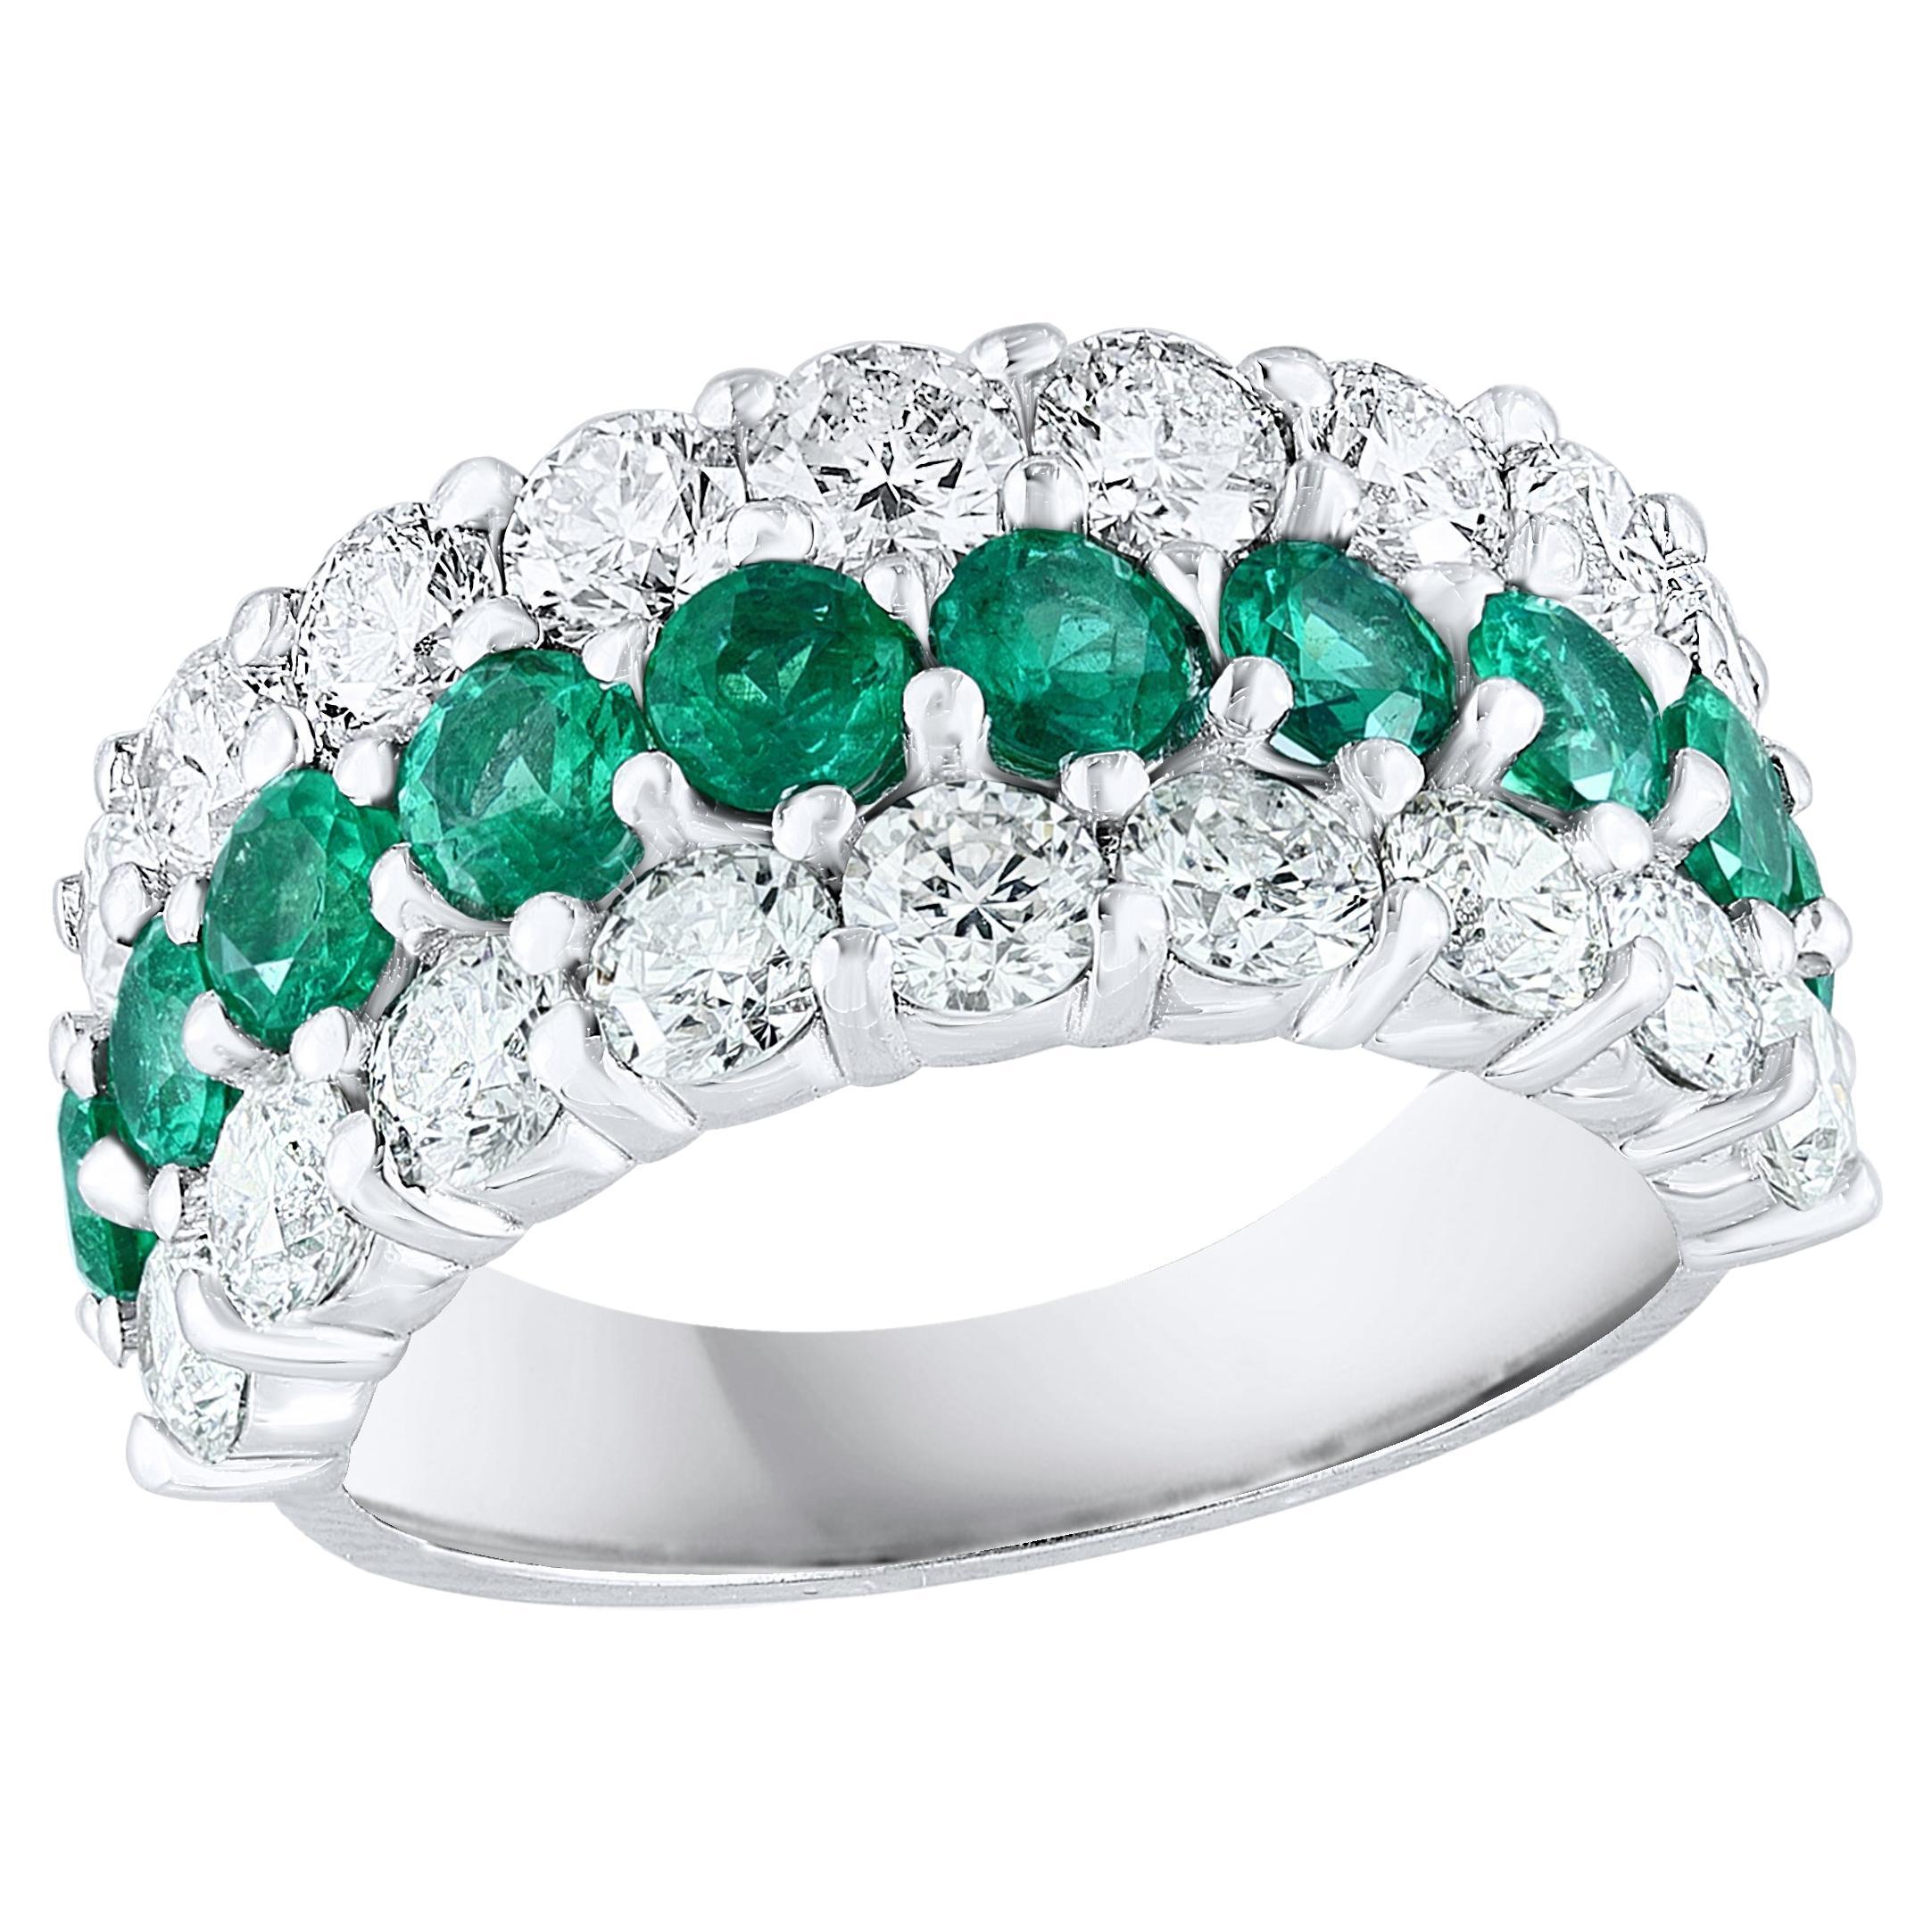 1.29 Ct Round Shape Emerald and Diamond Three Row Band Ring in 14K White Gold For Sale